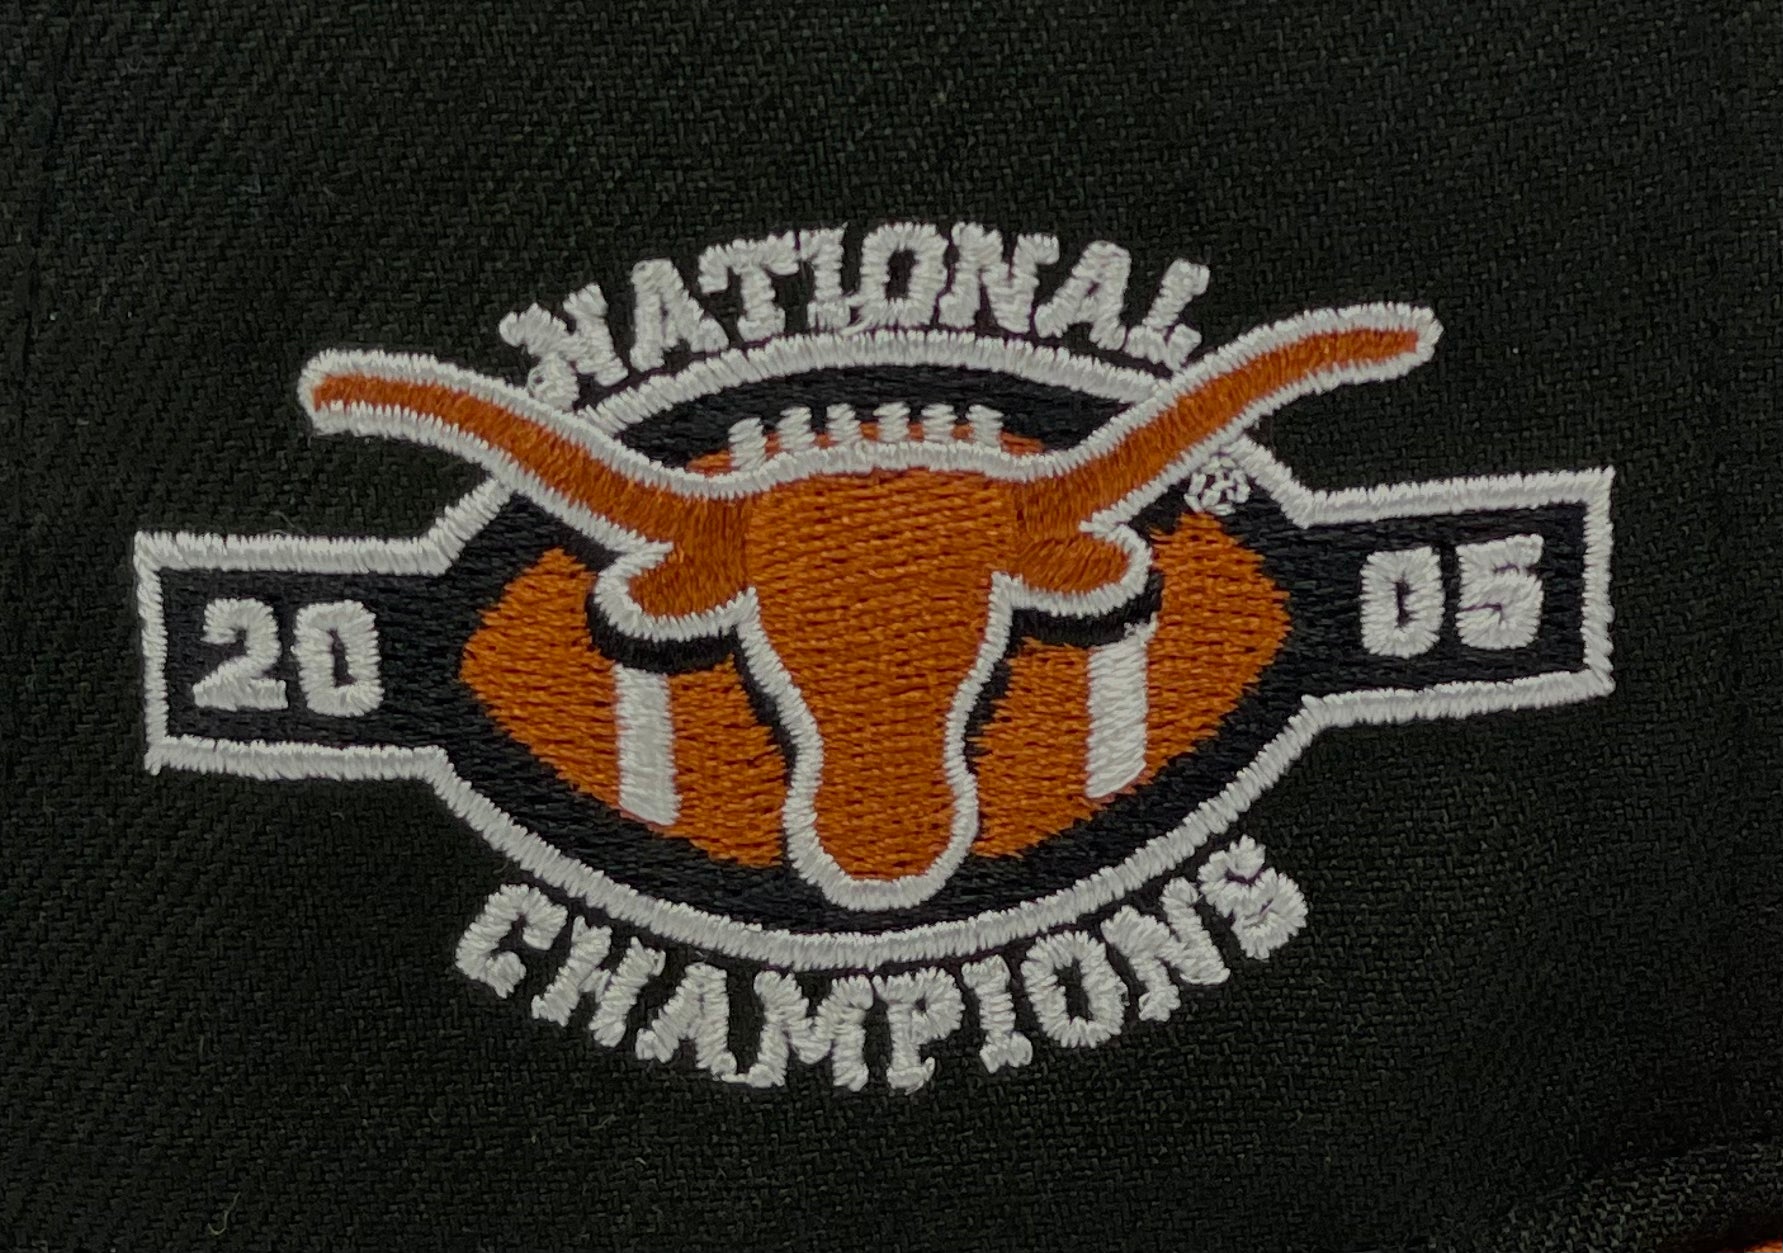 TEXAS LONGHORNS (2-TONE)(2005 NATIONAL CHAMPIONS) NEW ERA 59FIFTY FITTED